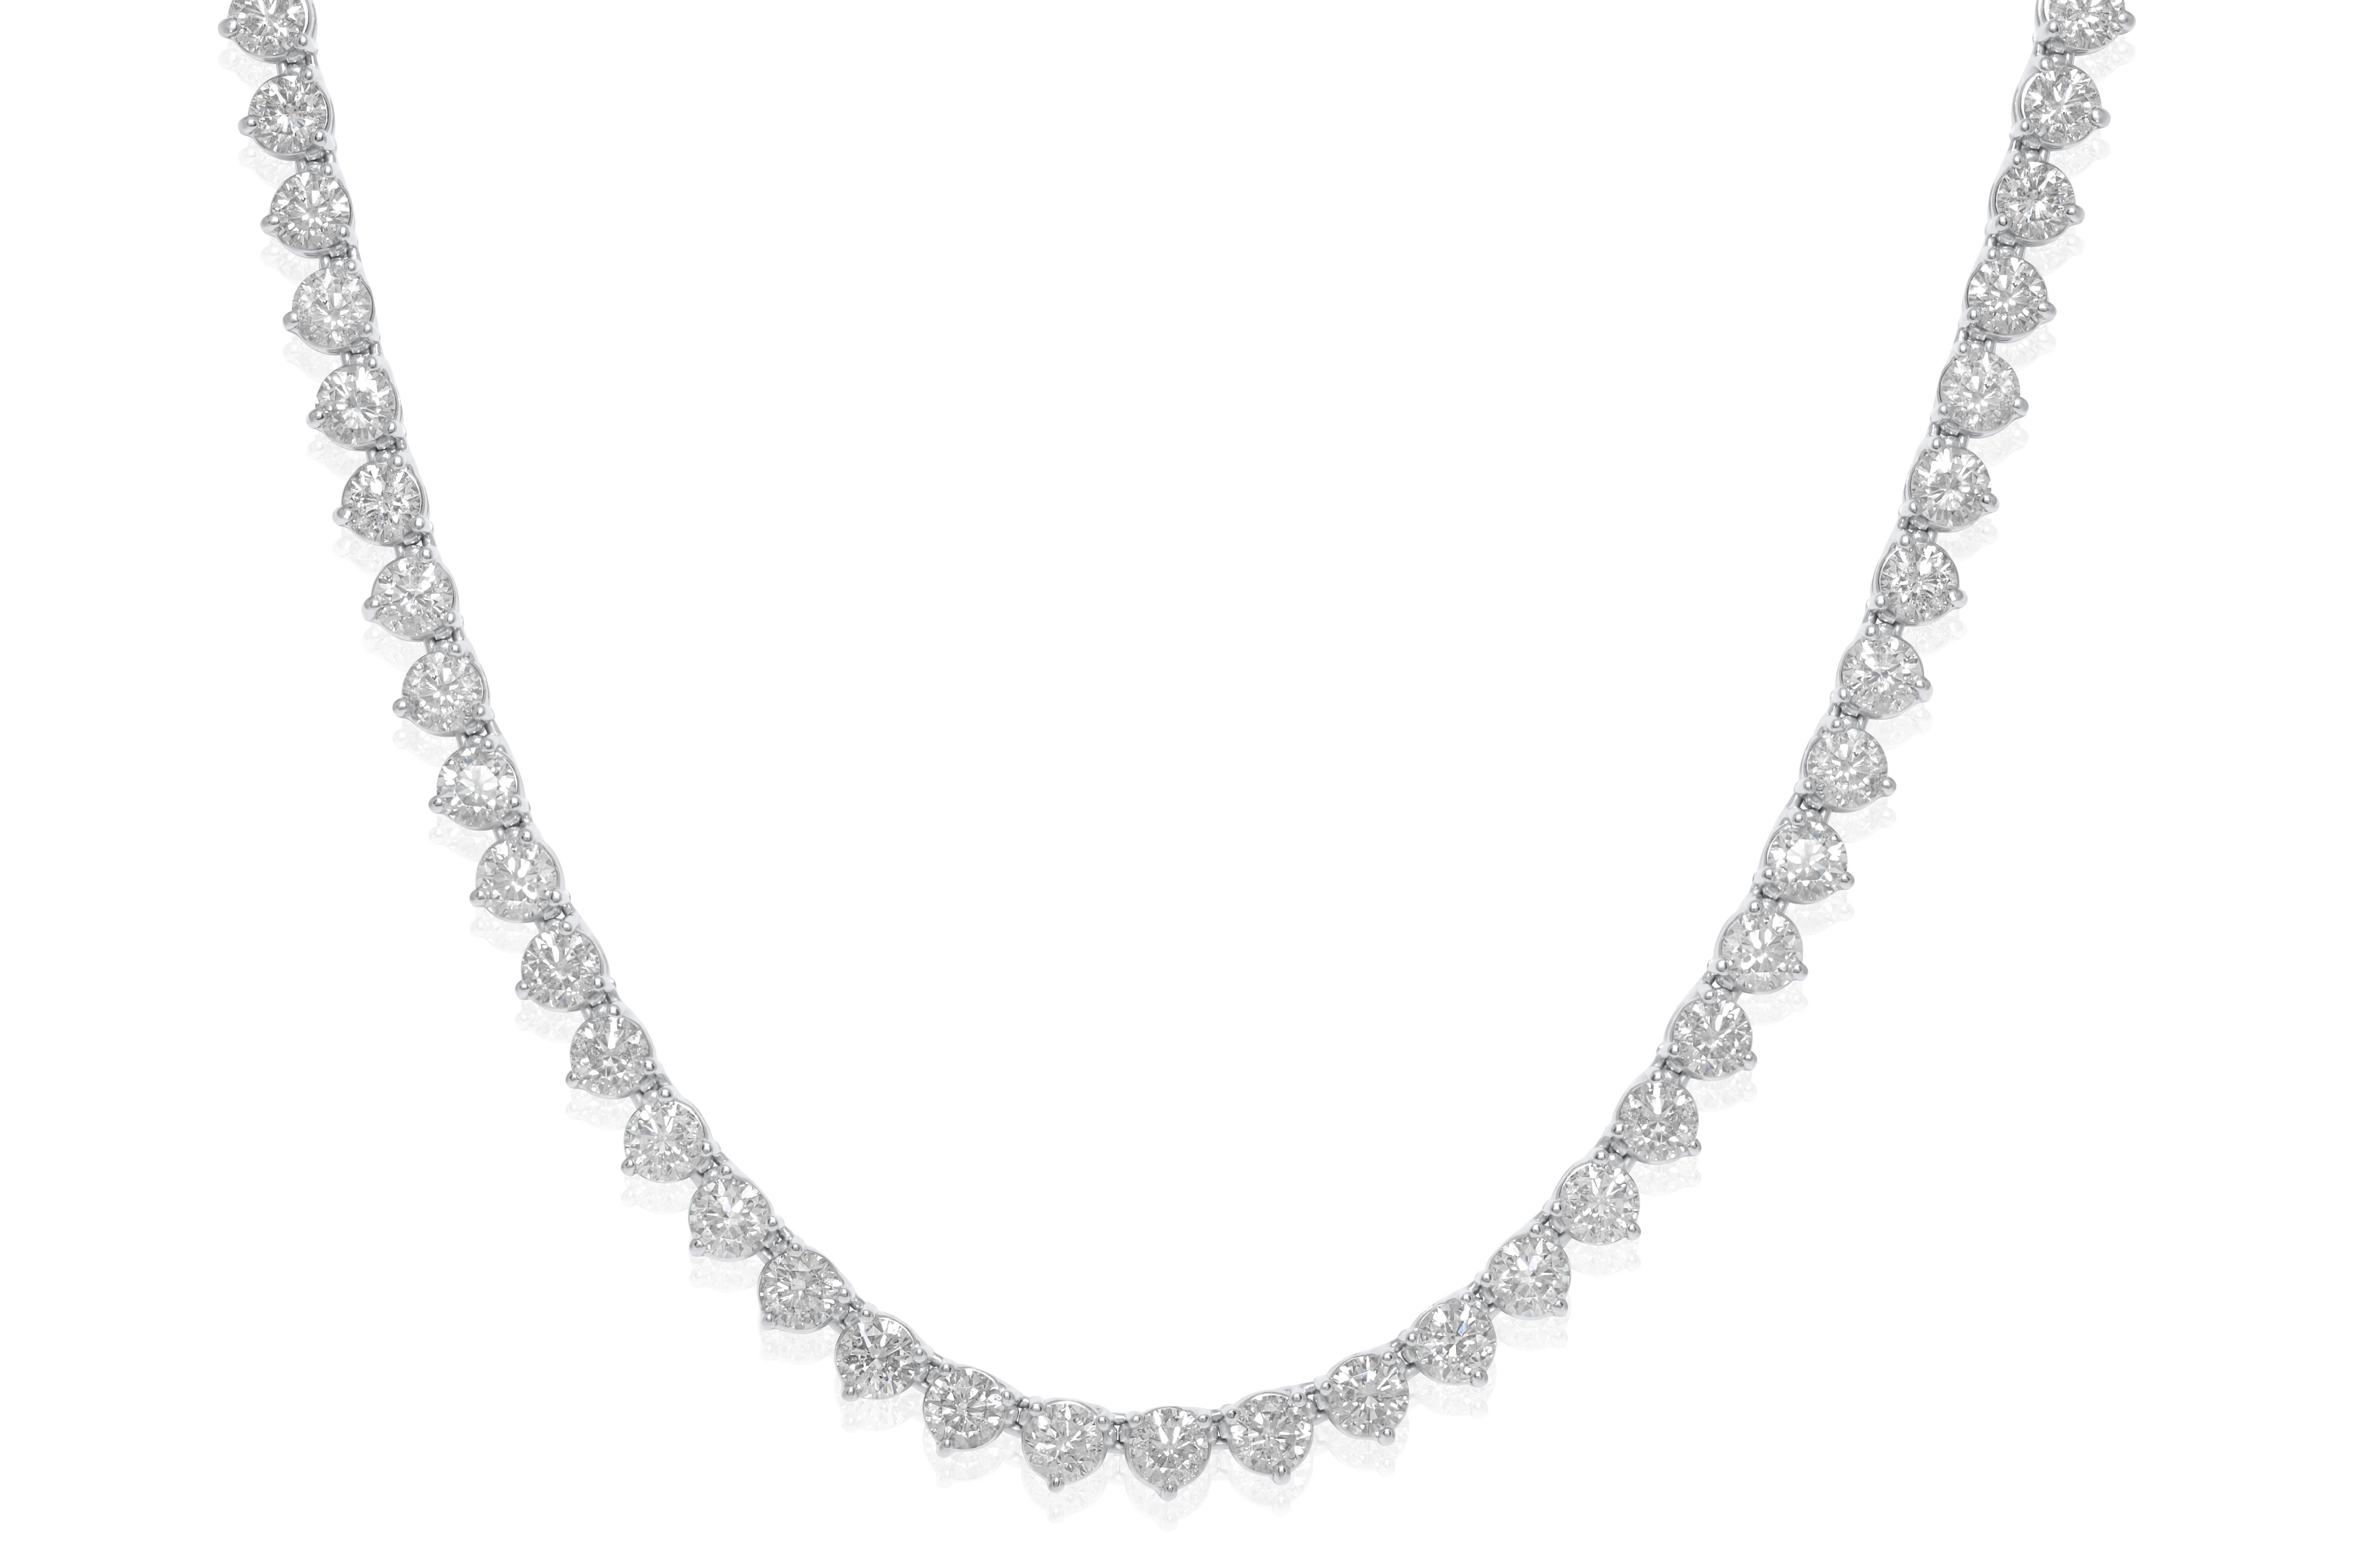 18K White Gold Three Prong Straight Line Diamond Tennis Necklace, Features 23.00 Carats all the same size round brilliant cut diamonds 3 prong mounting. Total 83 stones 17